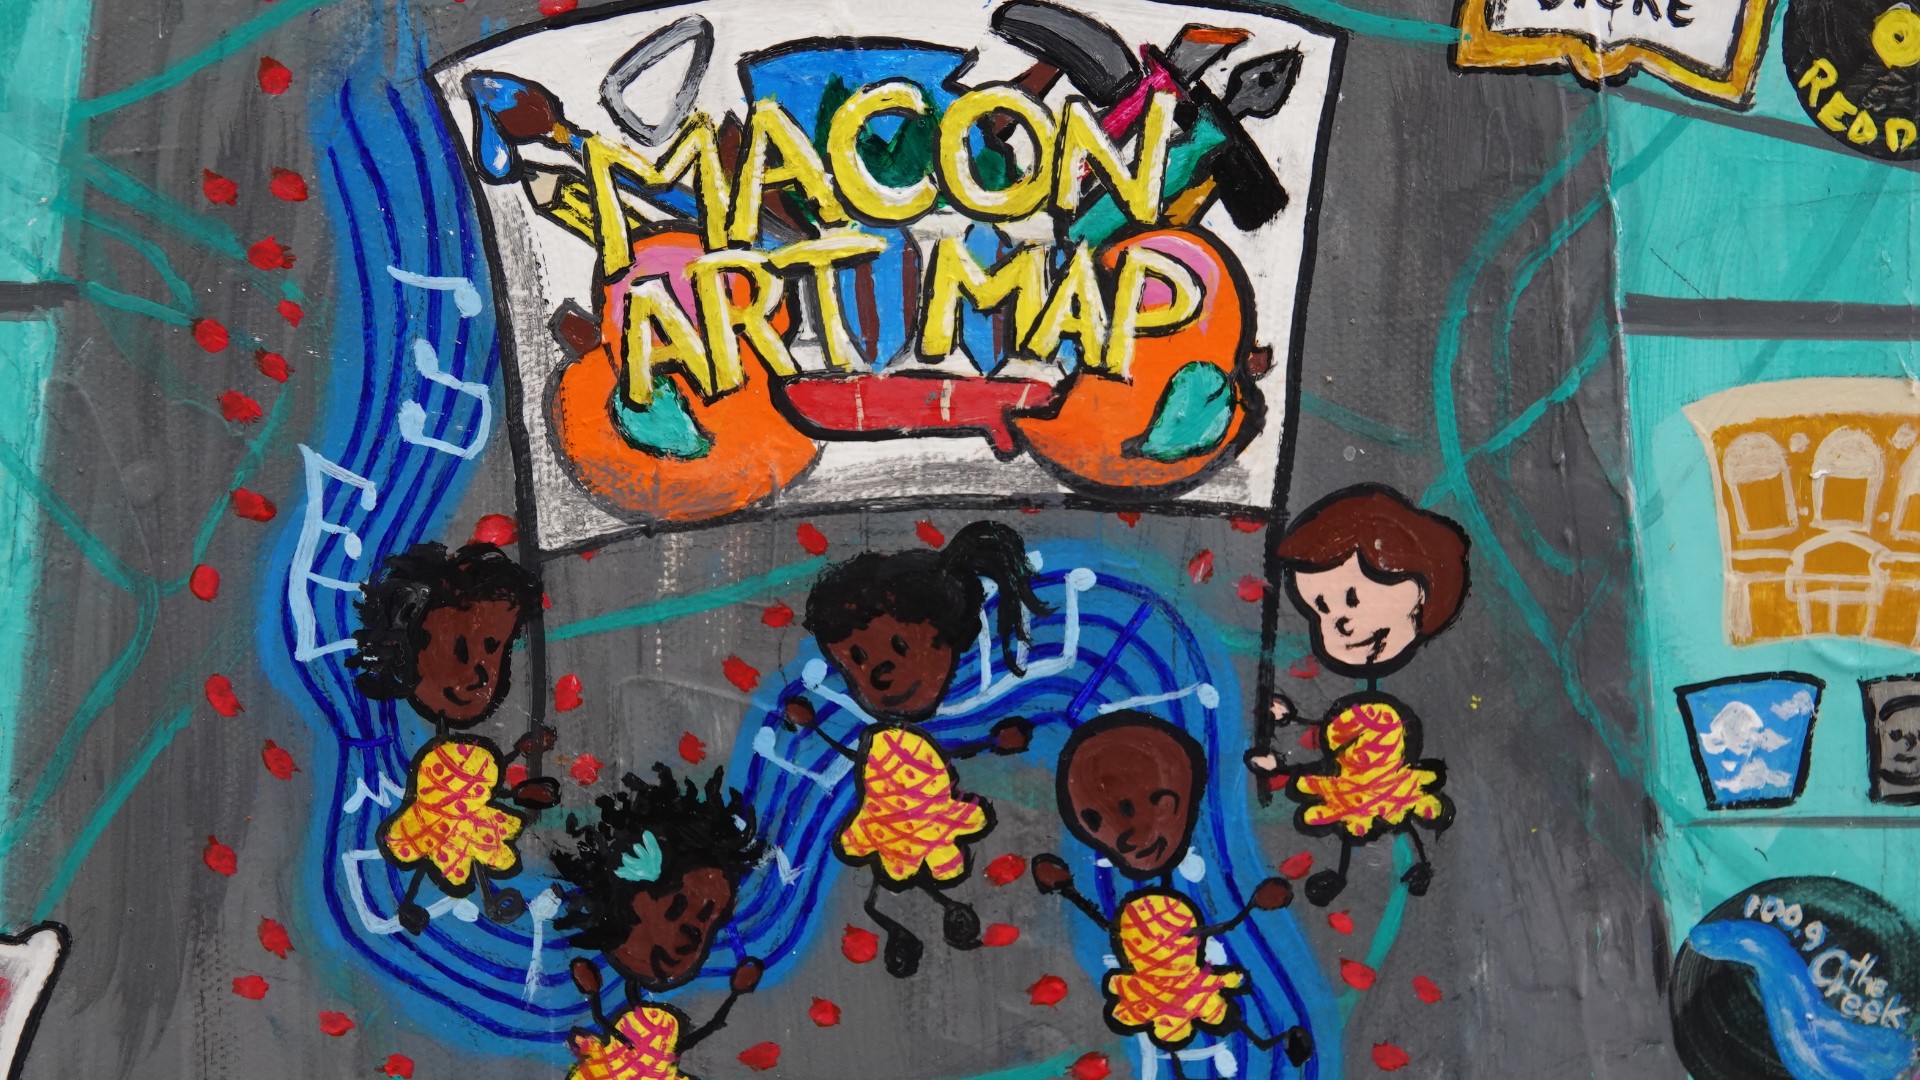 The Macon Art Map is not only a physical painting, but it's also a website that connects artists with the community.